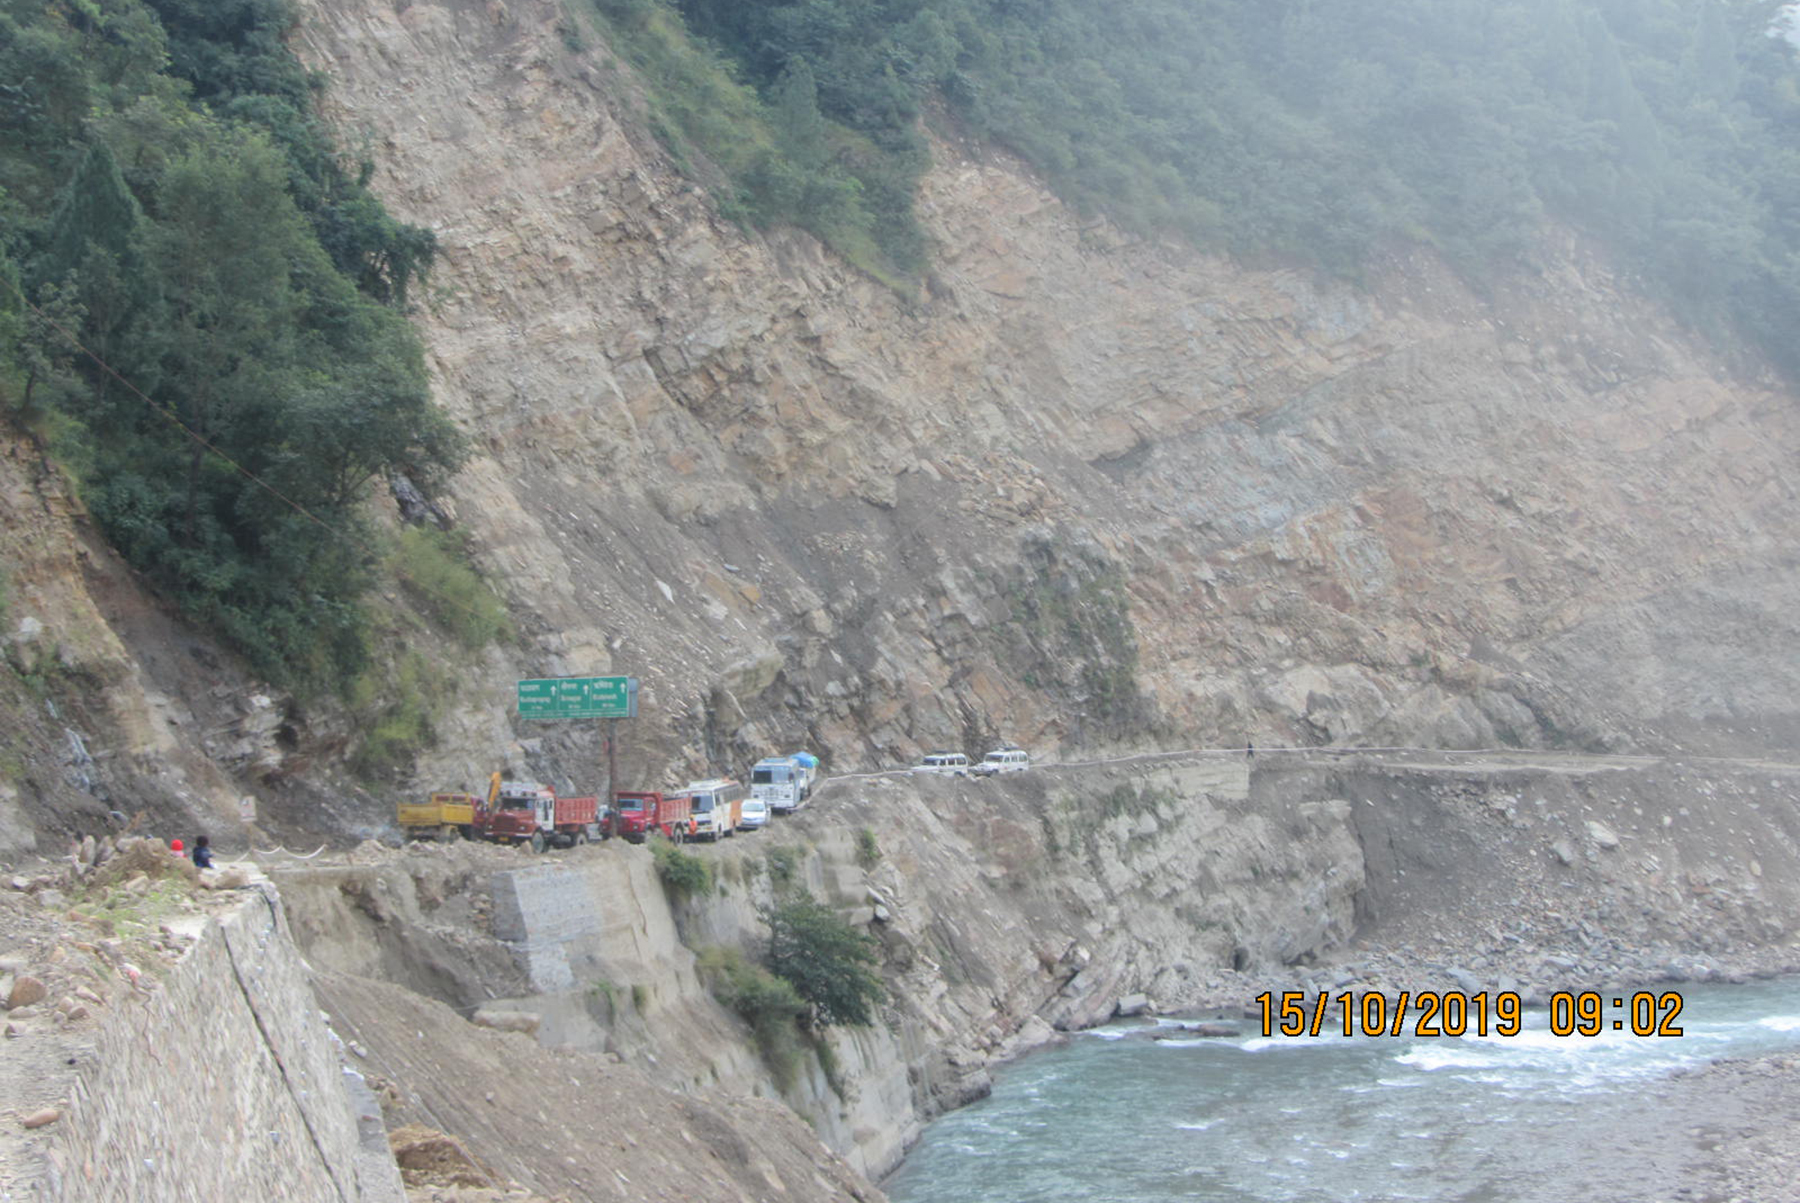 vehicles stranded due to a landslide atop a road being widened under the Char Dham Project [Image by Hemant Dhyani]